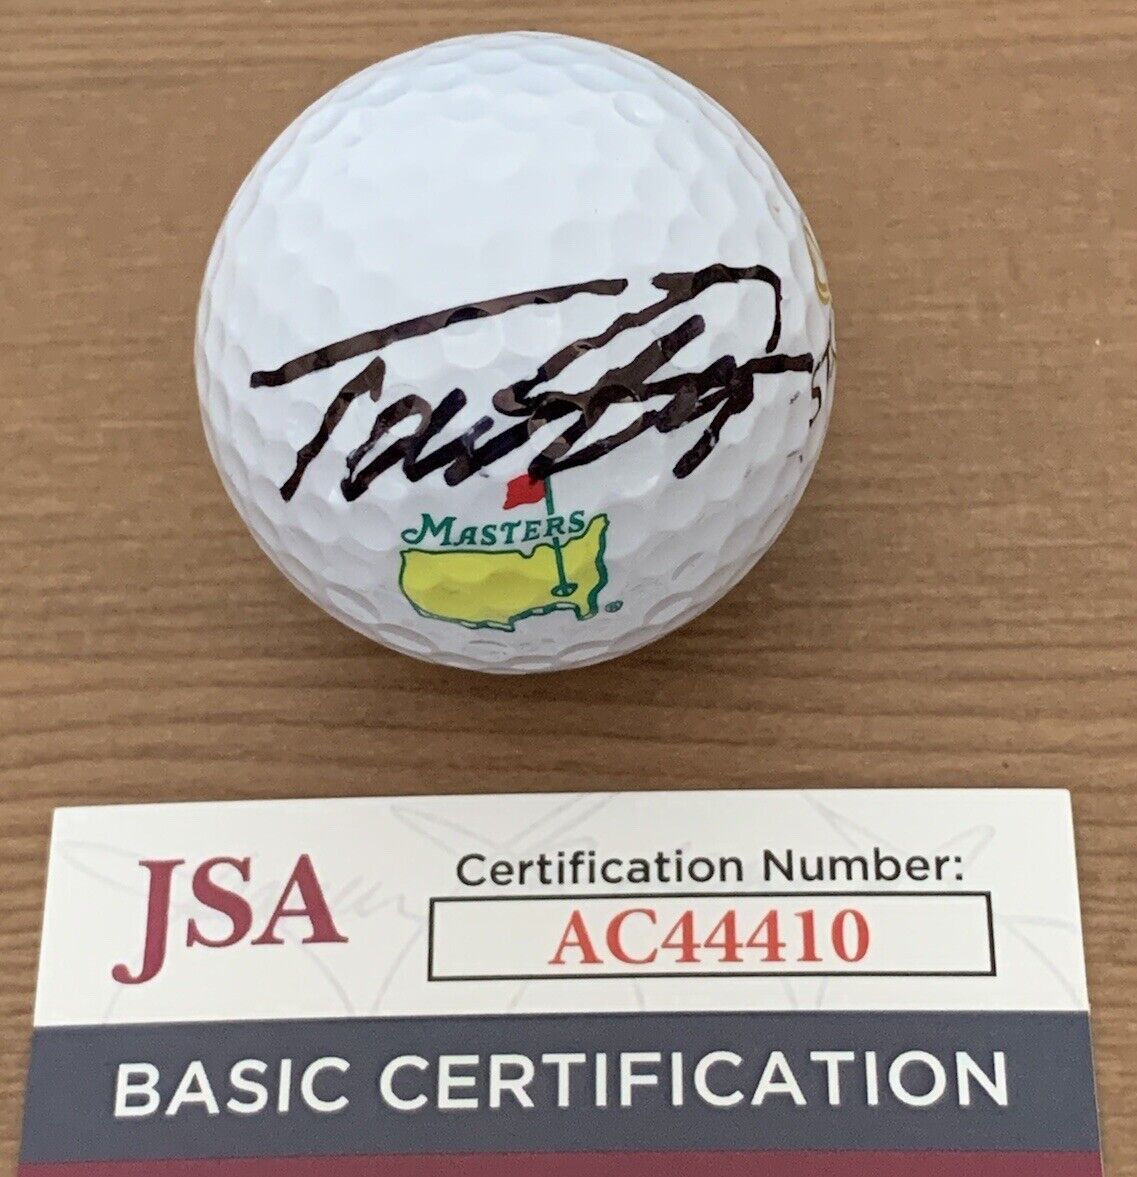 Masters Tommy Fleetwood Signed Autographed Masters Logo Golf Ball Jsa Ac44410